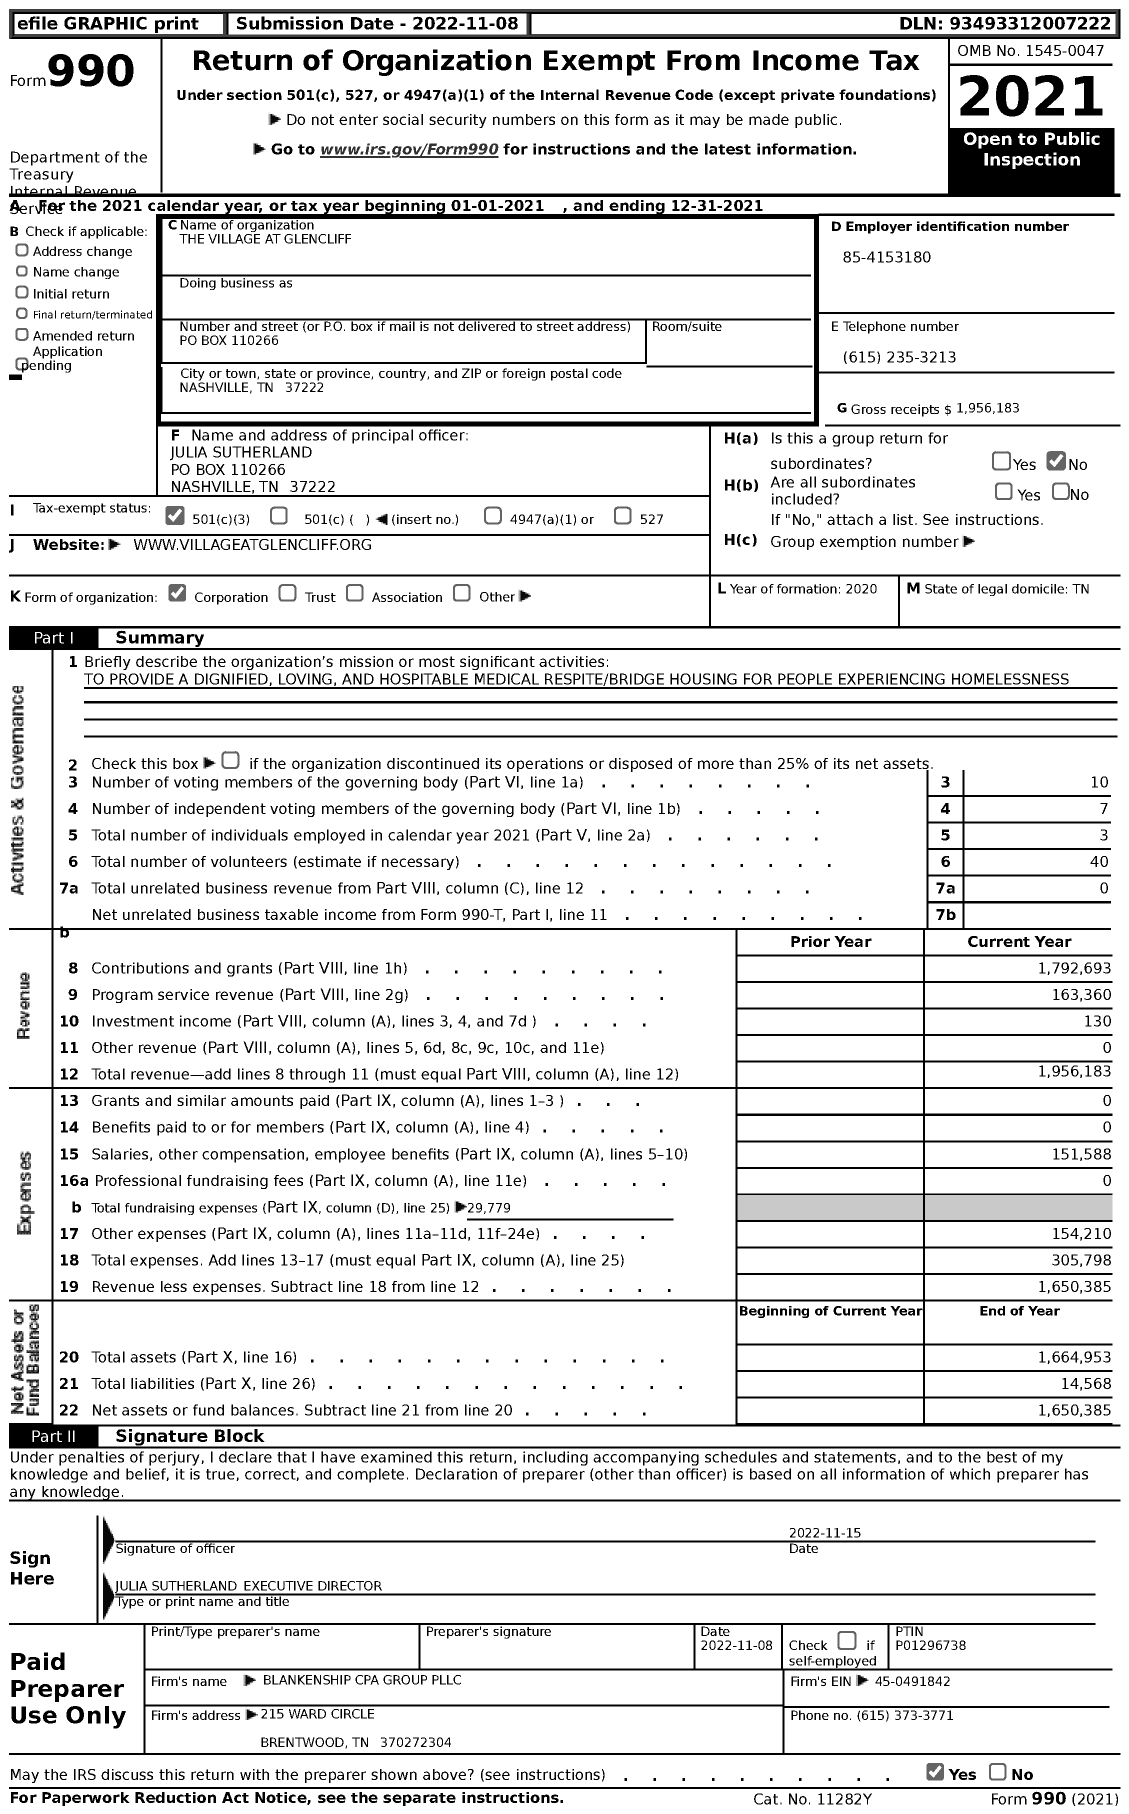 Image of first page of 2021 Form 990 for The Village at Glencliff